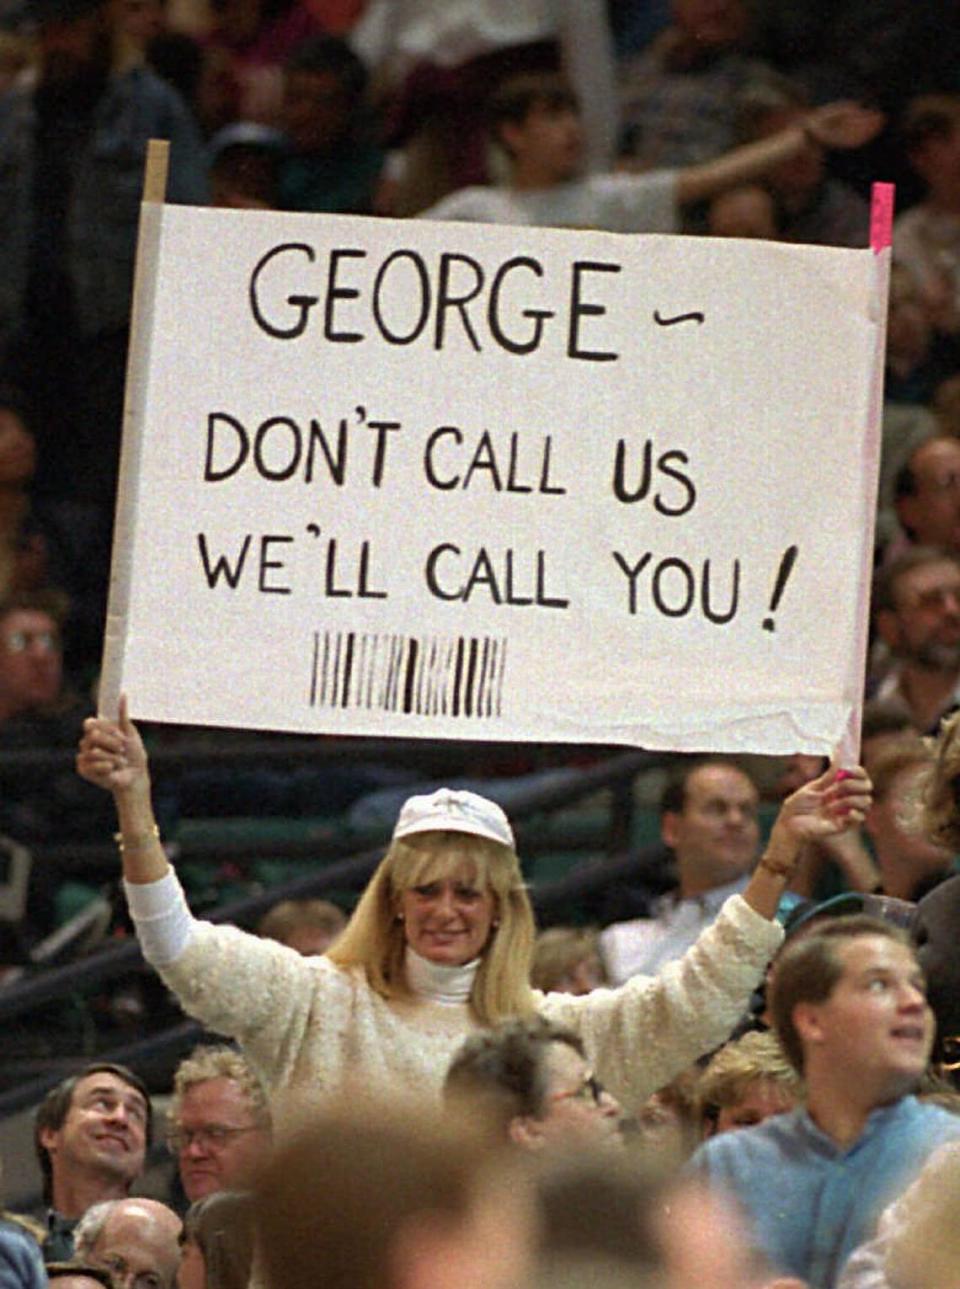 Over time, the relationship between former Charlotte Hornets owner George Shinn and the team’s fans soured.